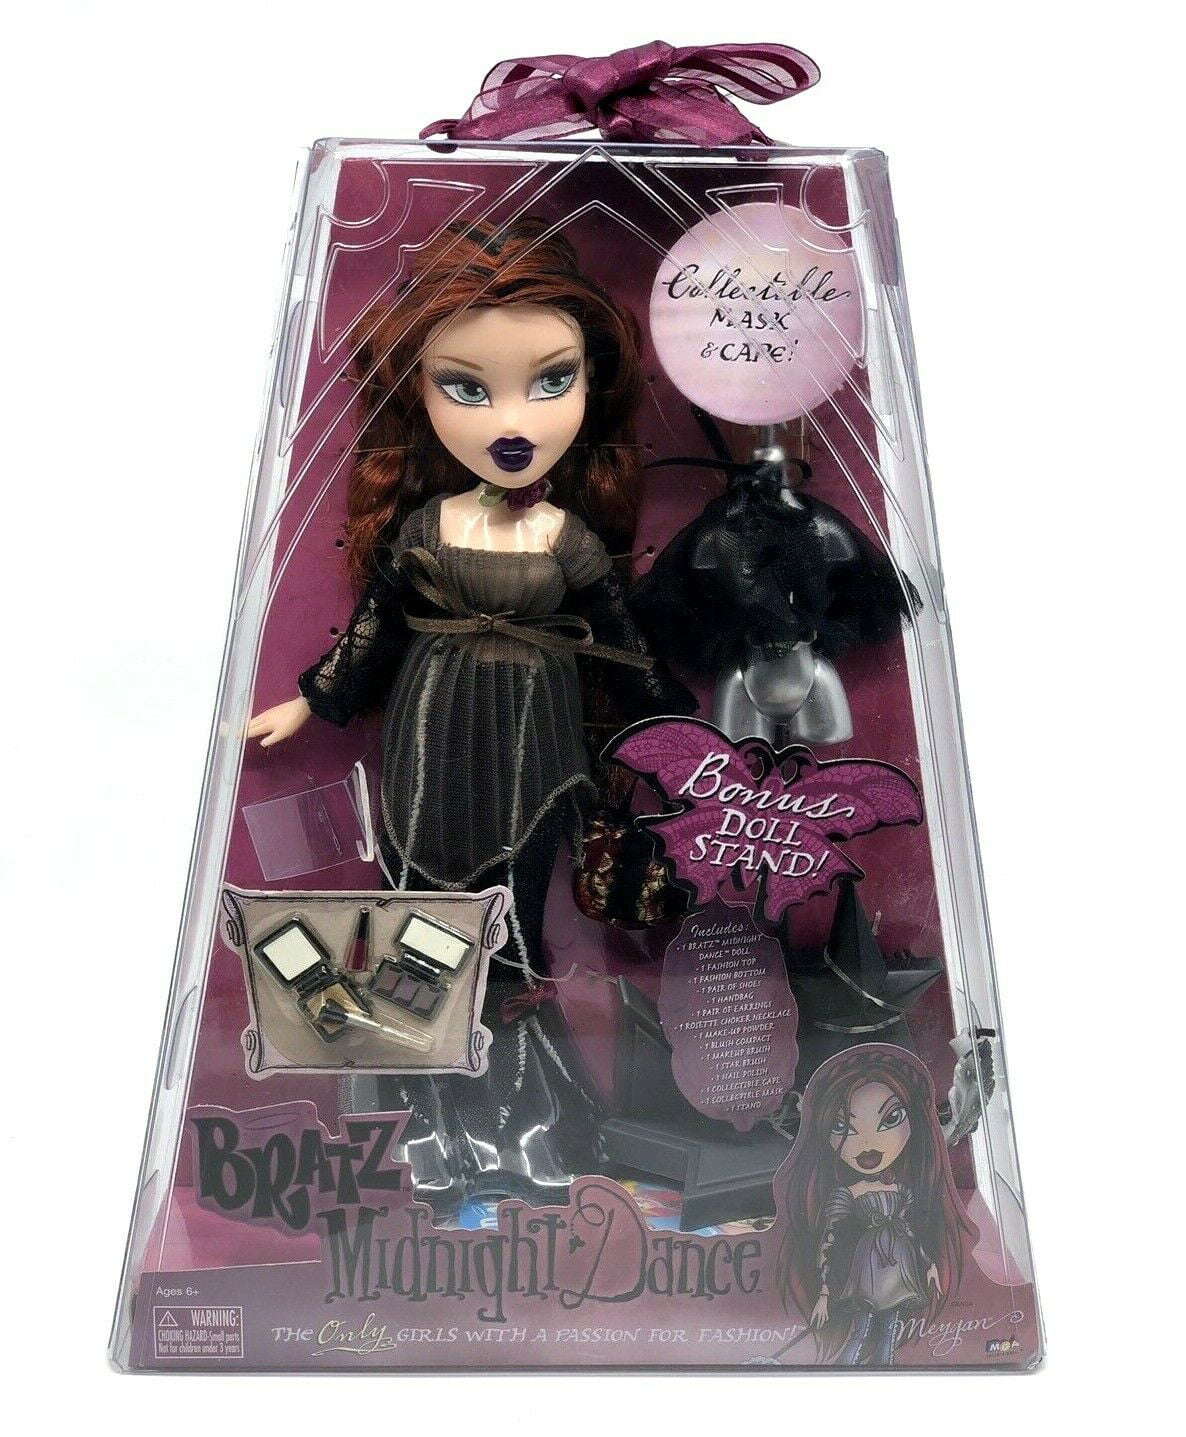 Meygan from Bratz Midnight Dance series let's your little one have her very  own Goth girl doll. So thoughtful